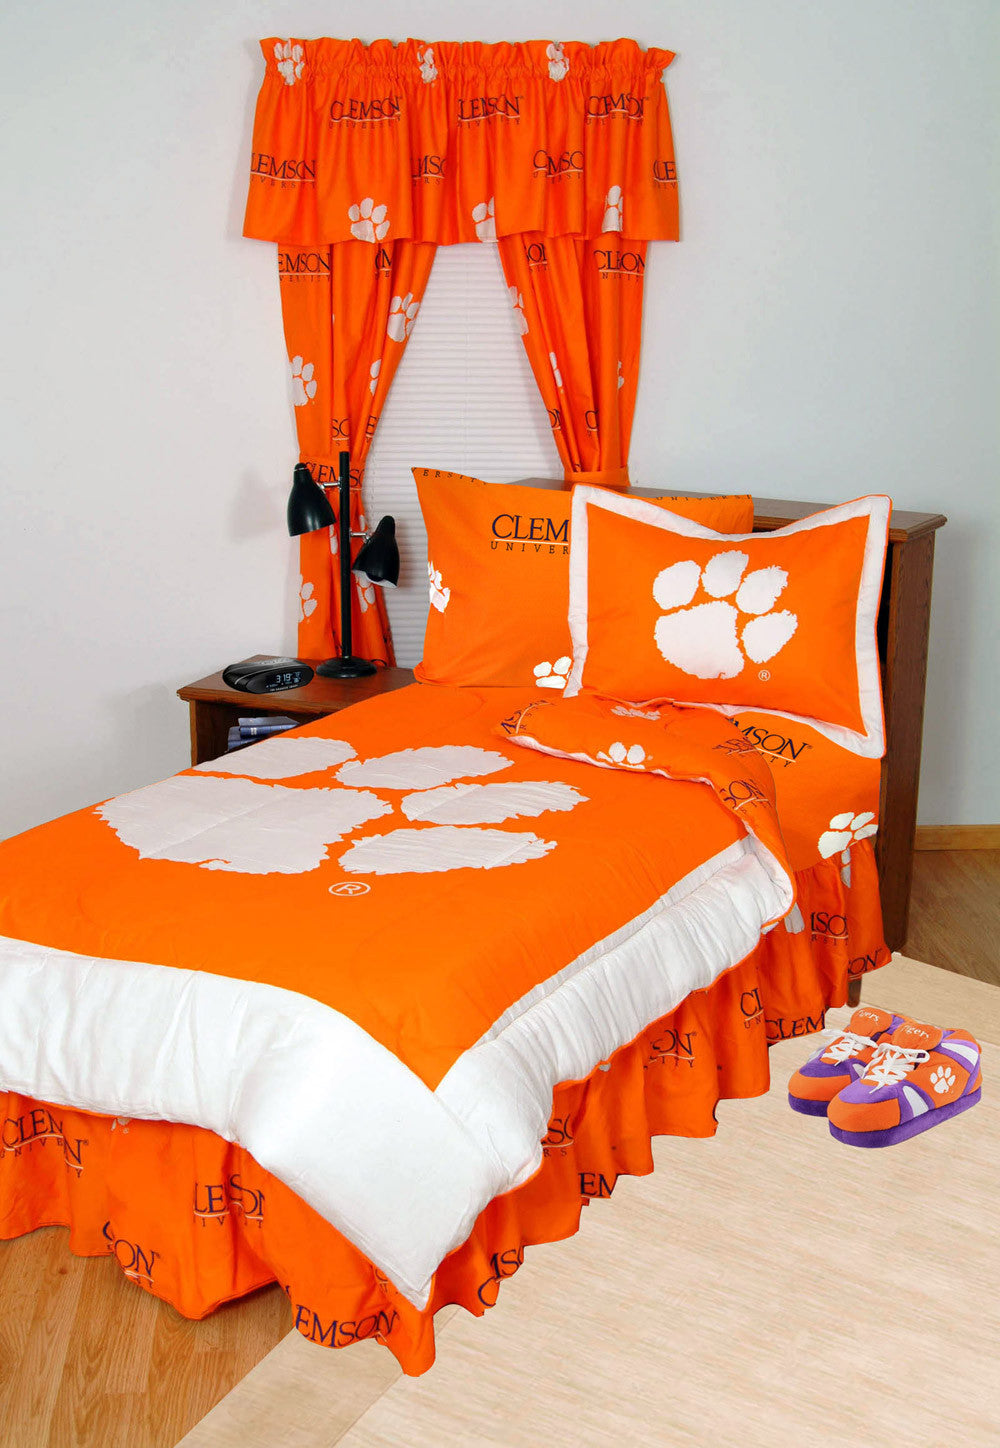 Clemson Bed In A Bag Queen - With Team Colored Sheets - Clebbqu By College Covers